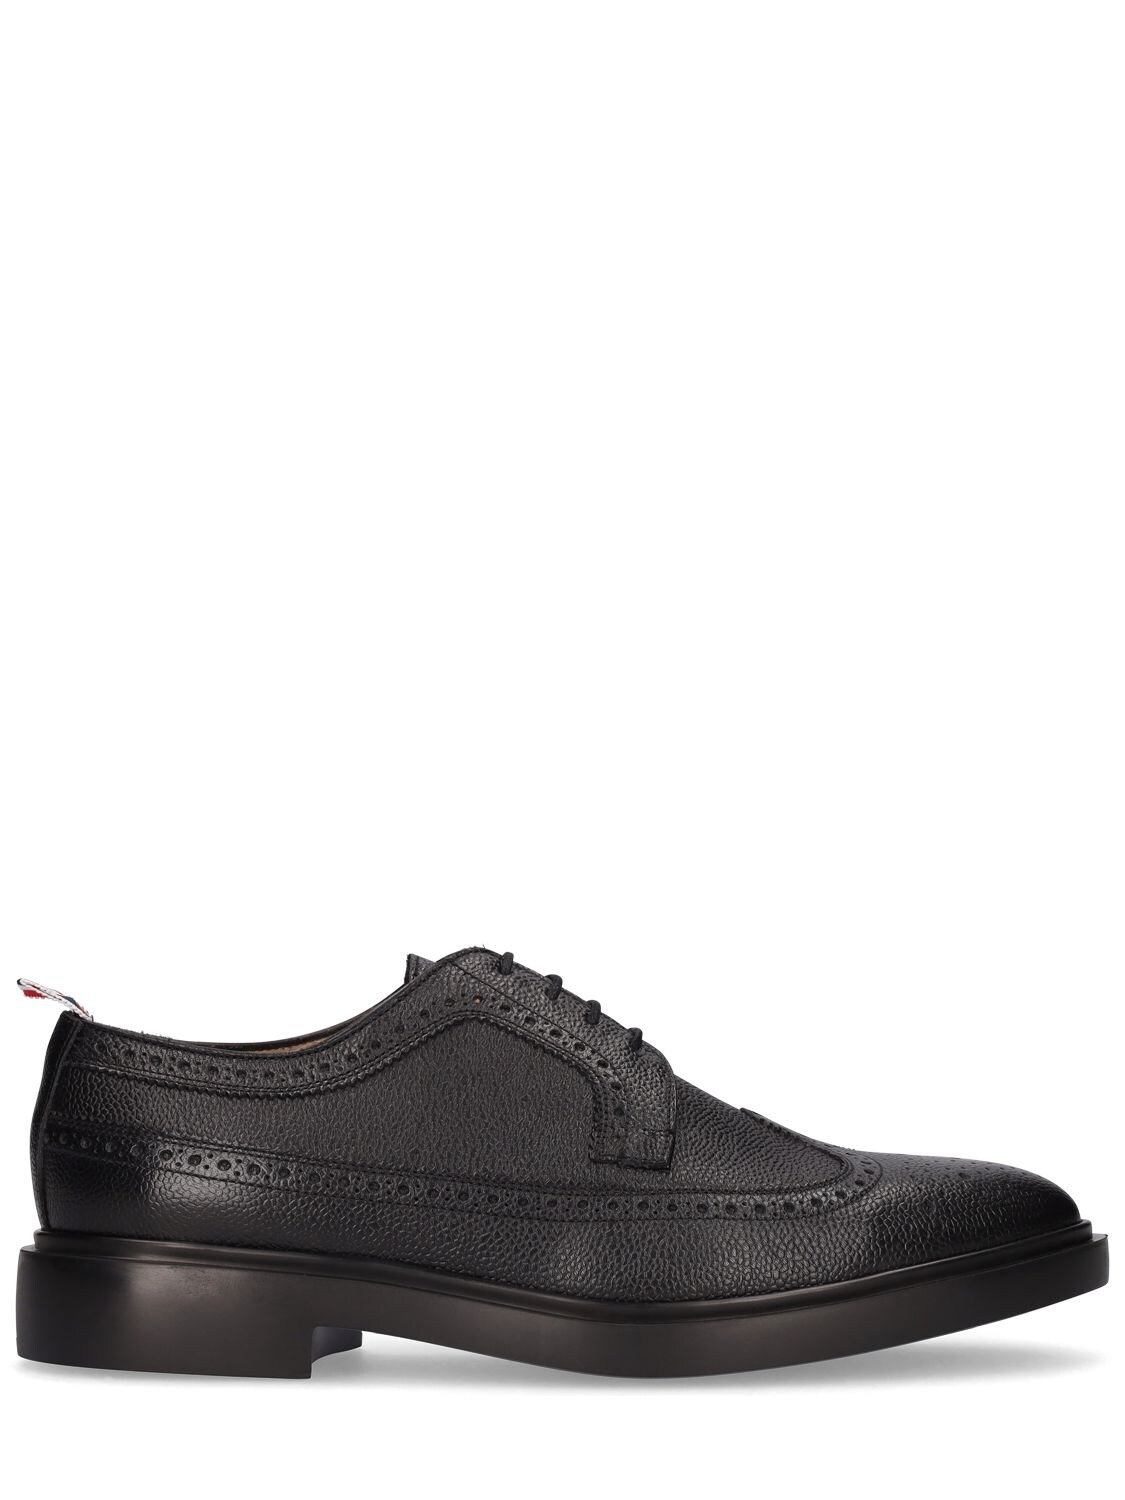 THOM BROWNE Pebbled Leather Wing Tip Brogue Shoes